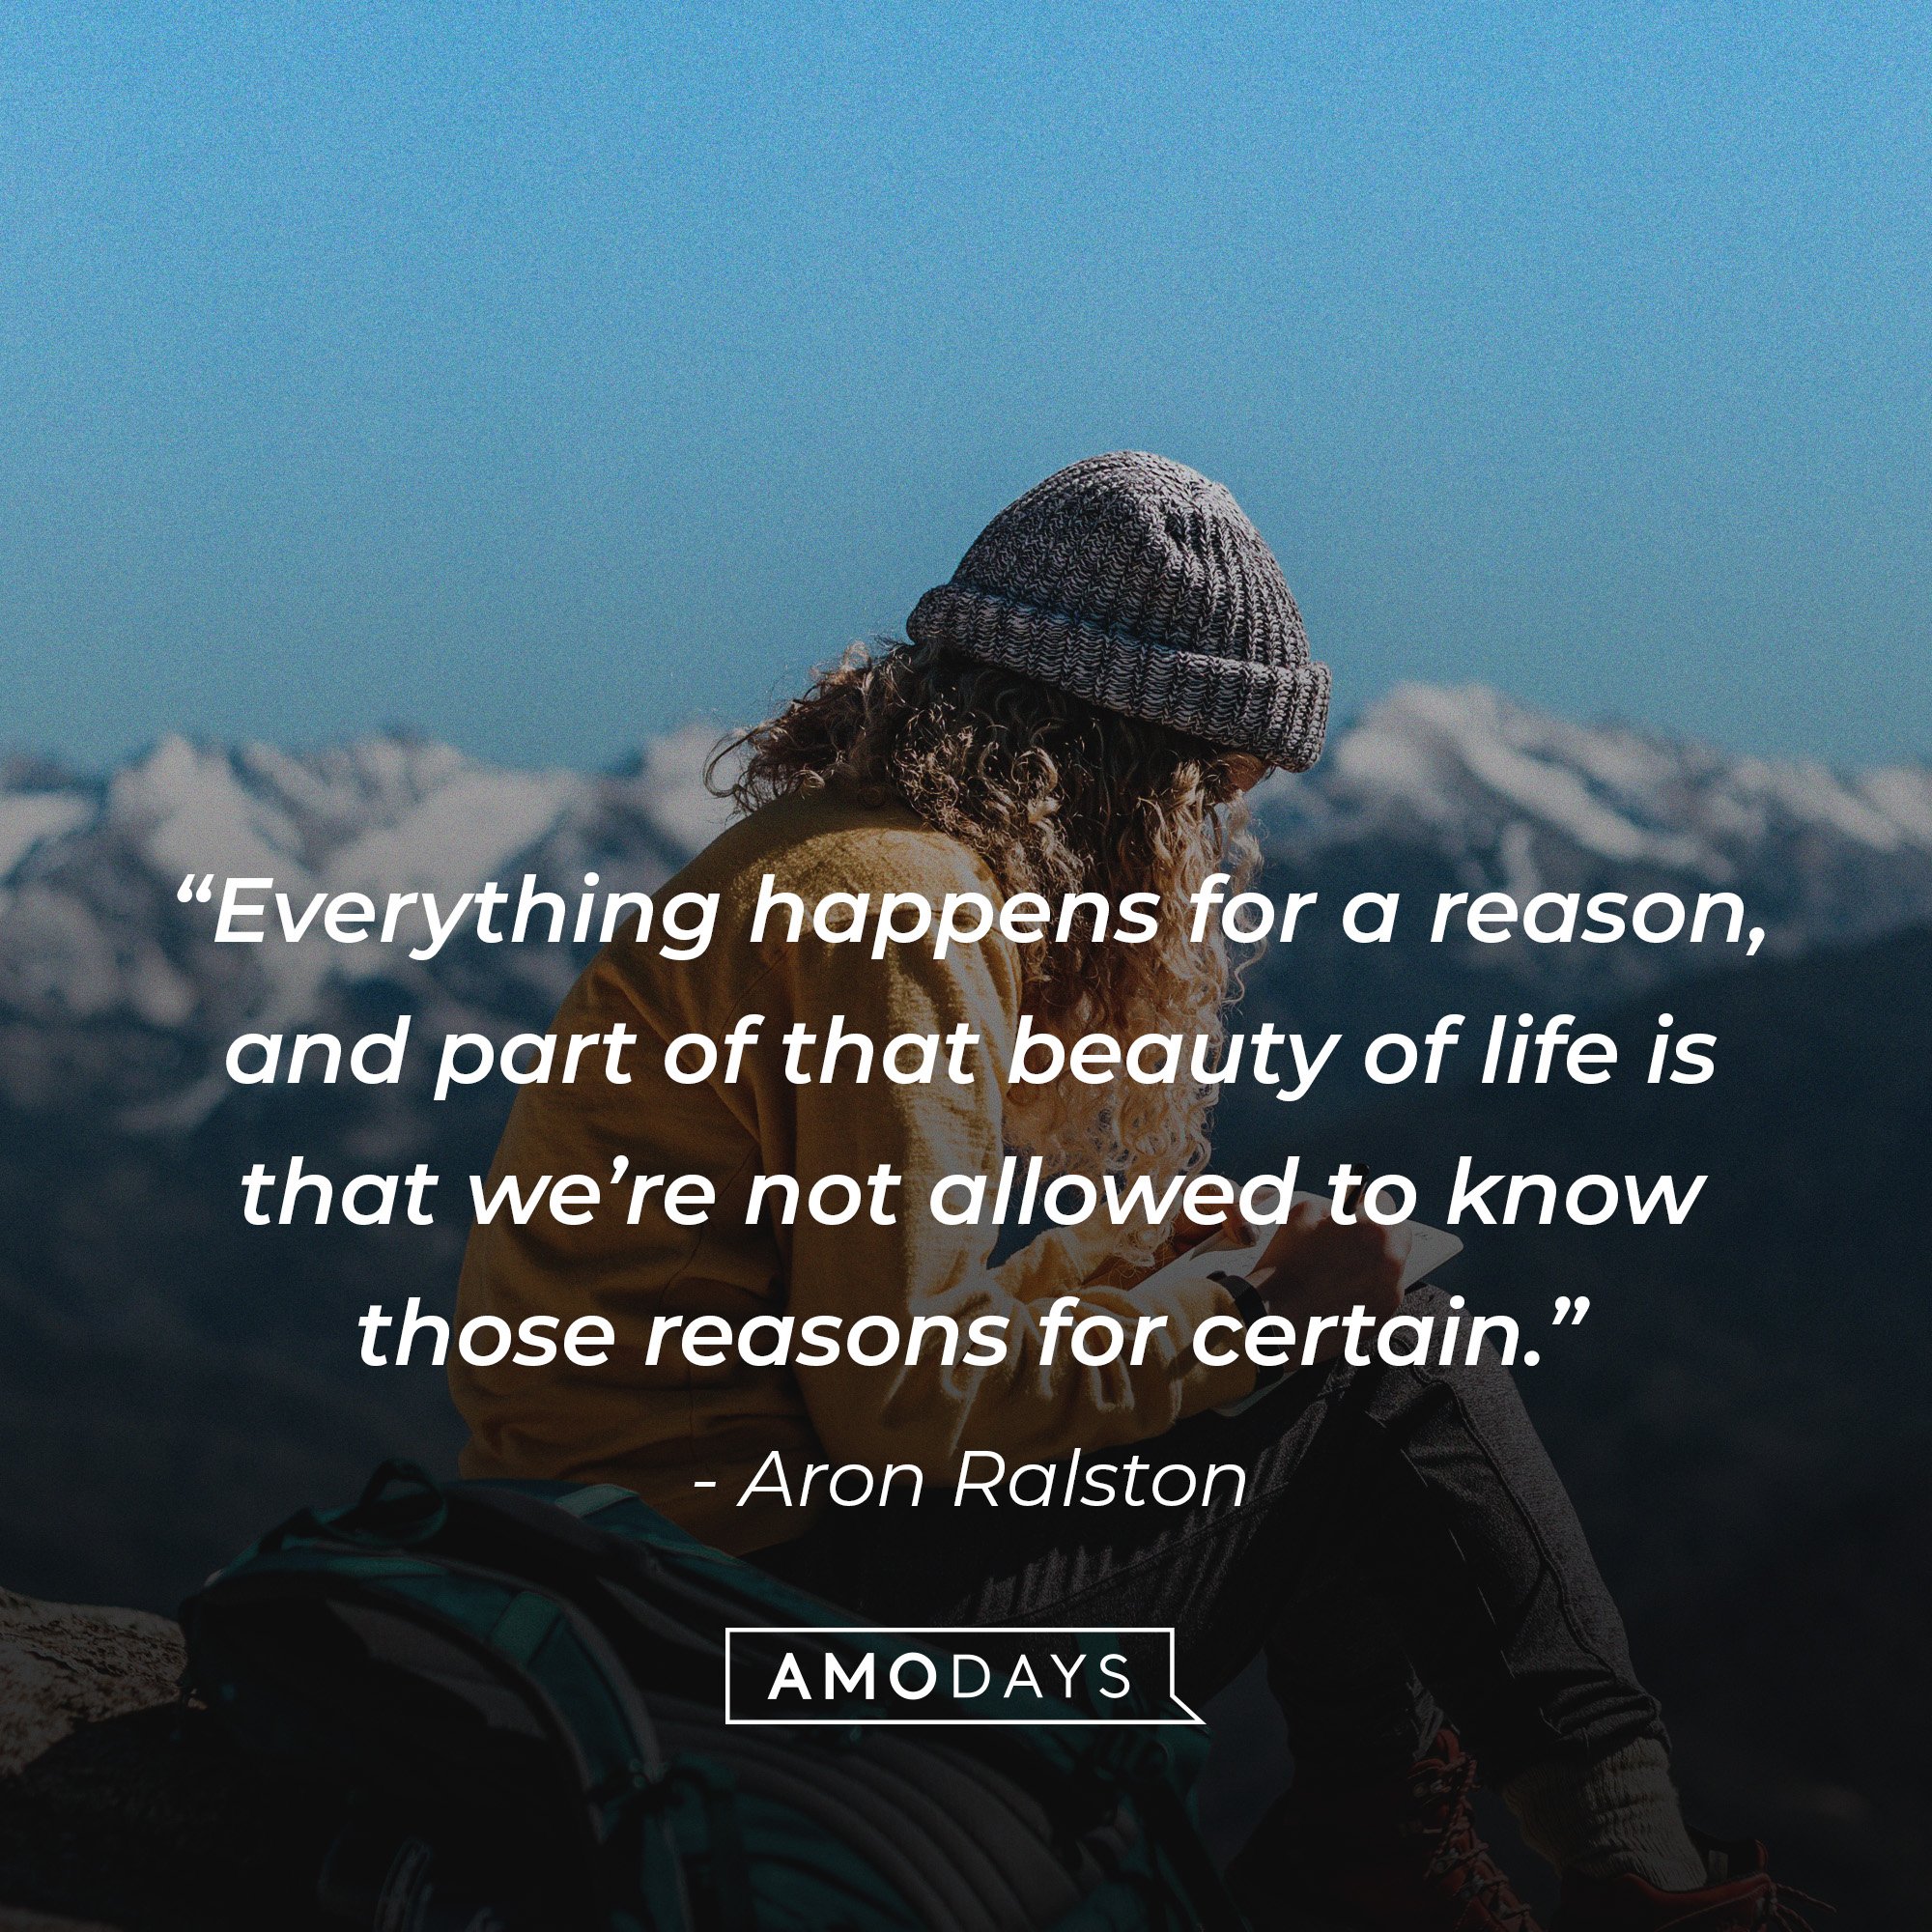 Aron Ralston's quote: “Everything happens for a reason, and part of that beauty of life is that we’re not allowed to know those reasons for certain.” | Image: AmoDays